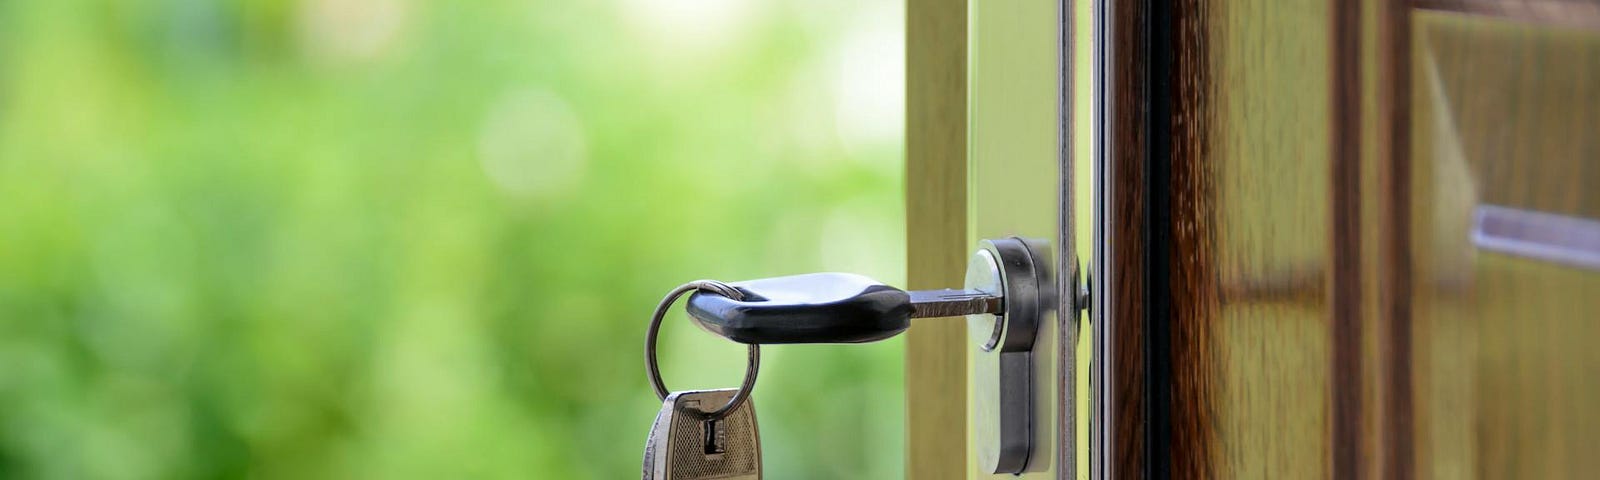 A key remains in the lock of the front door of a residential home.